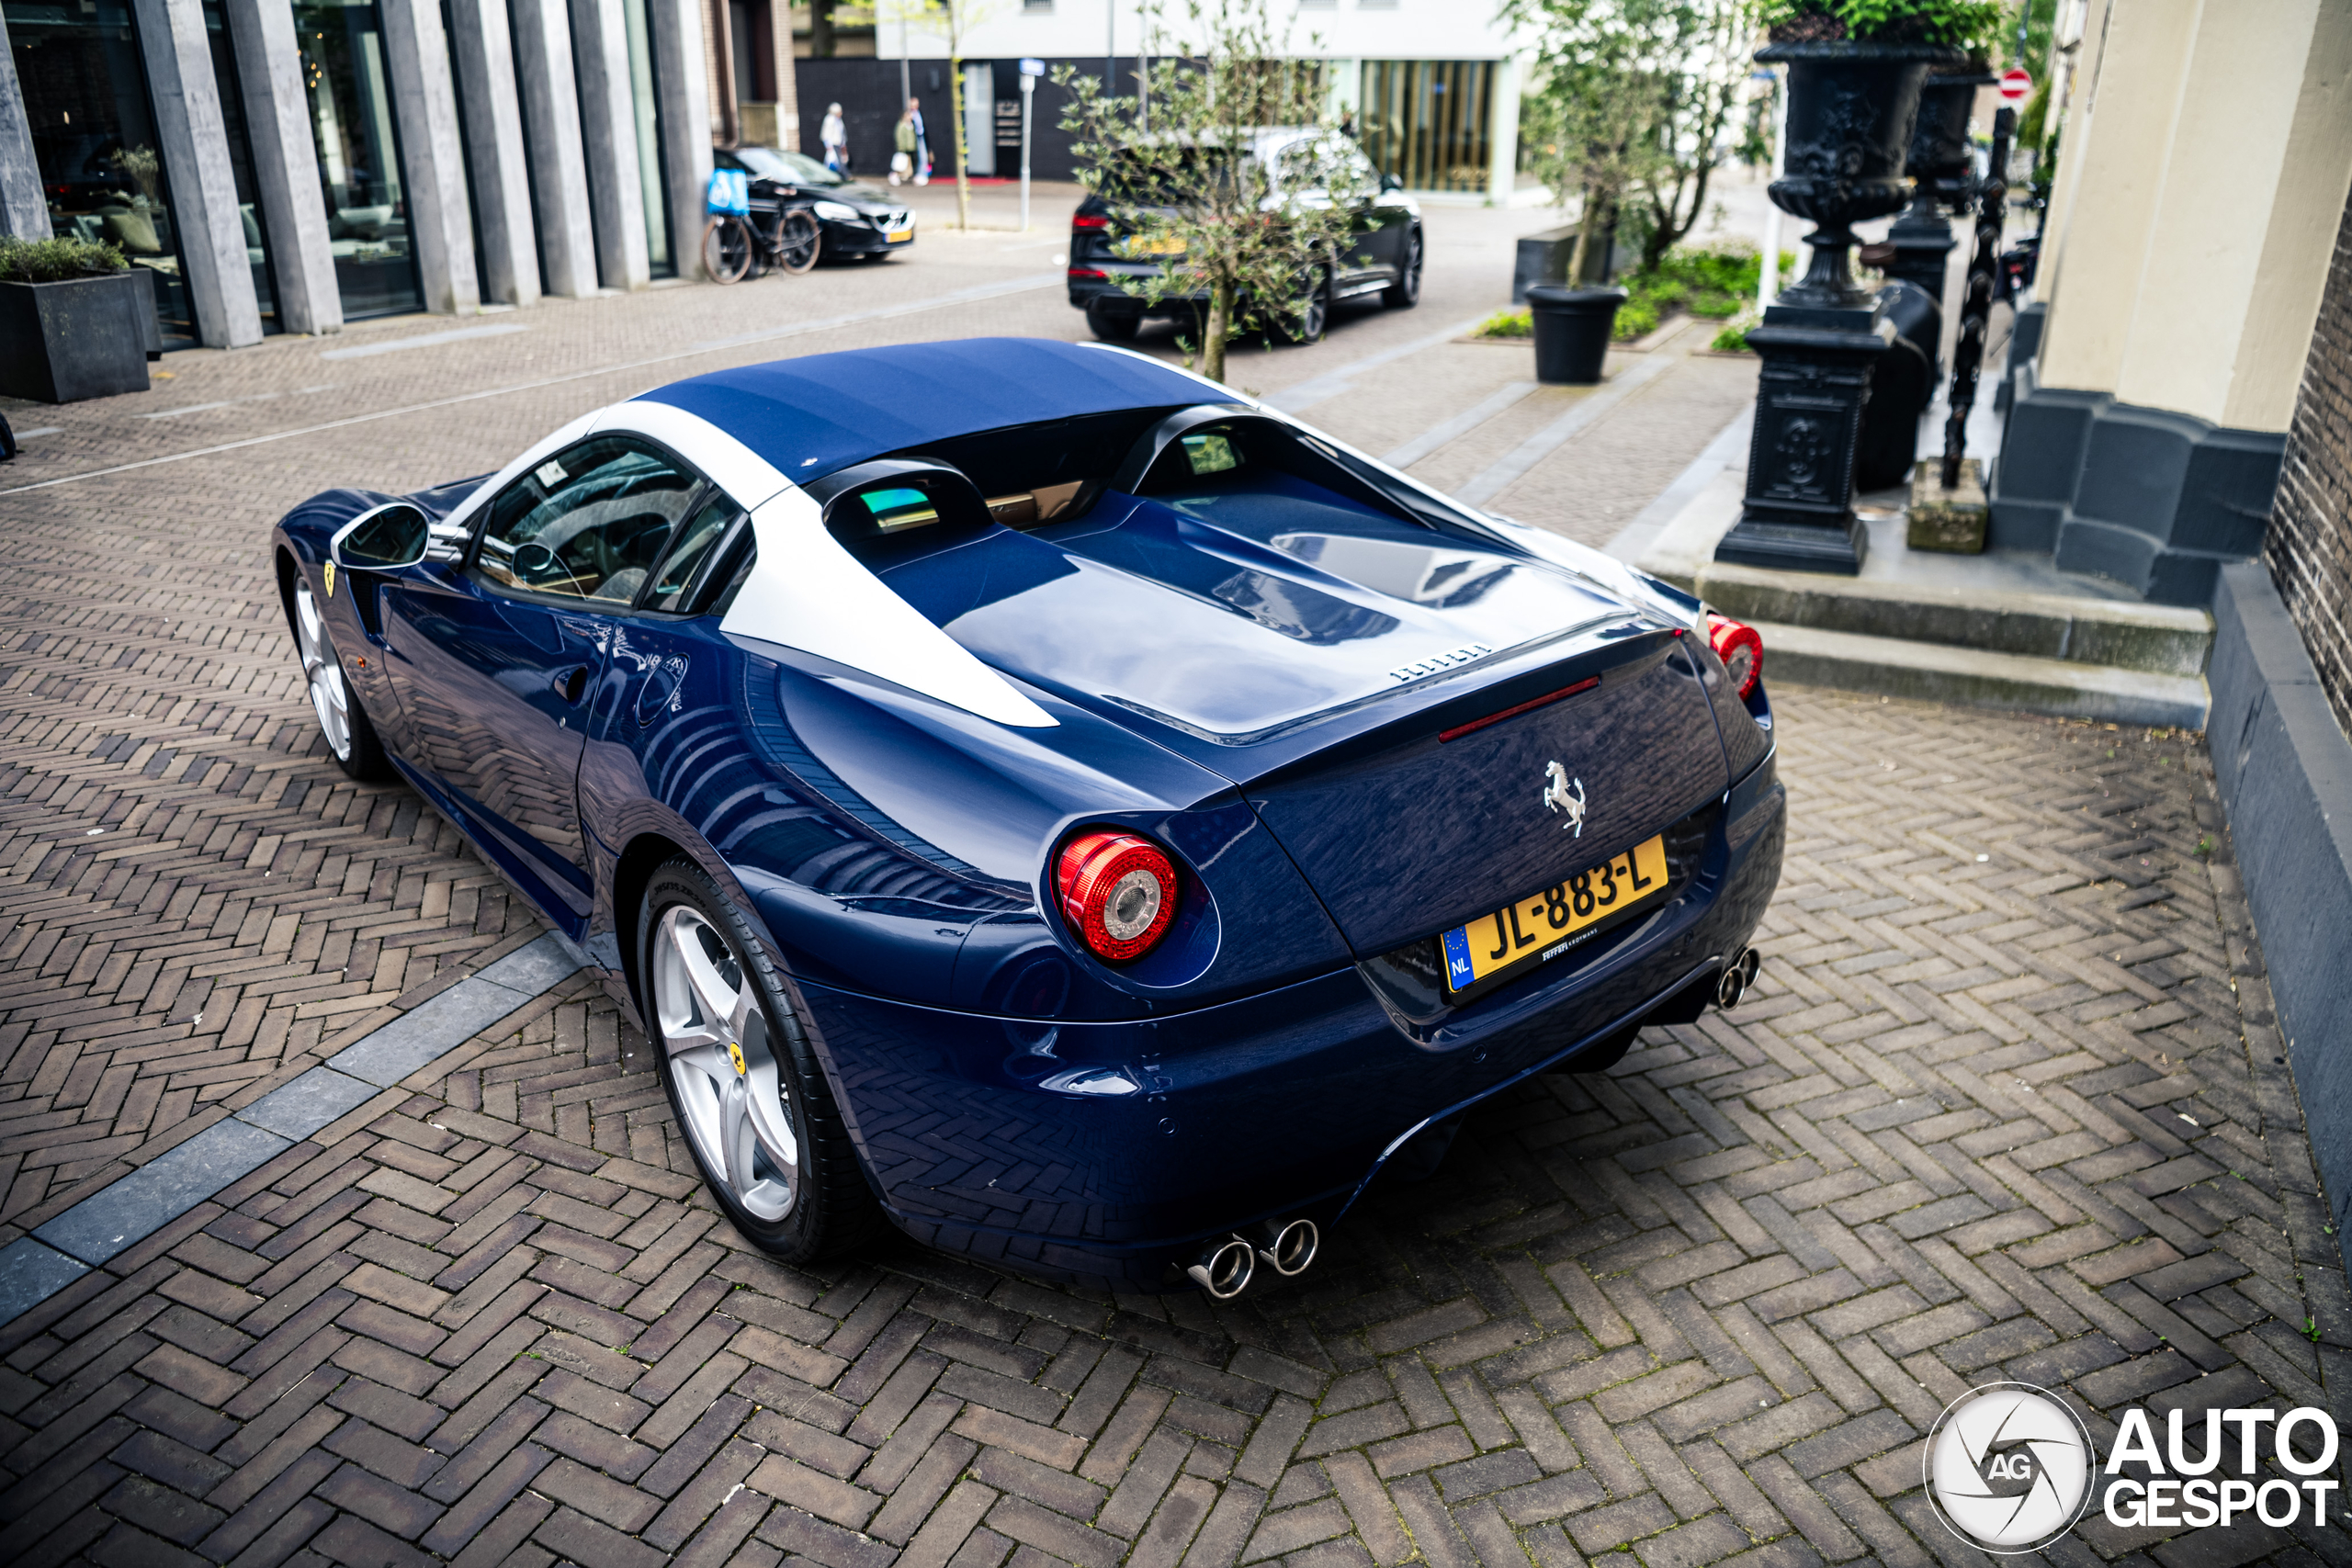 A magnificent SA Aperta appears in the netherlands